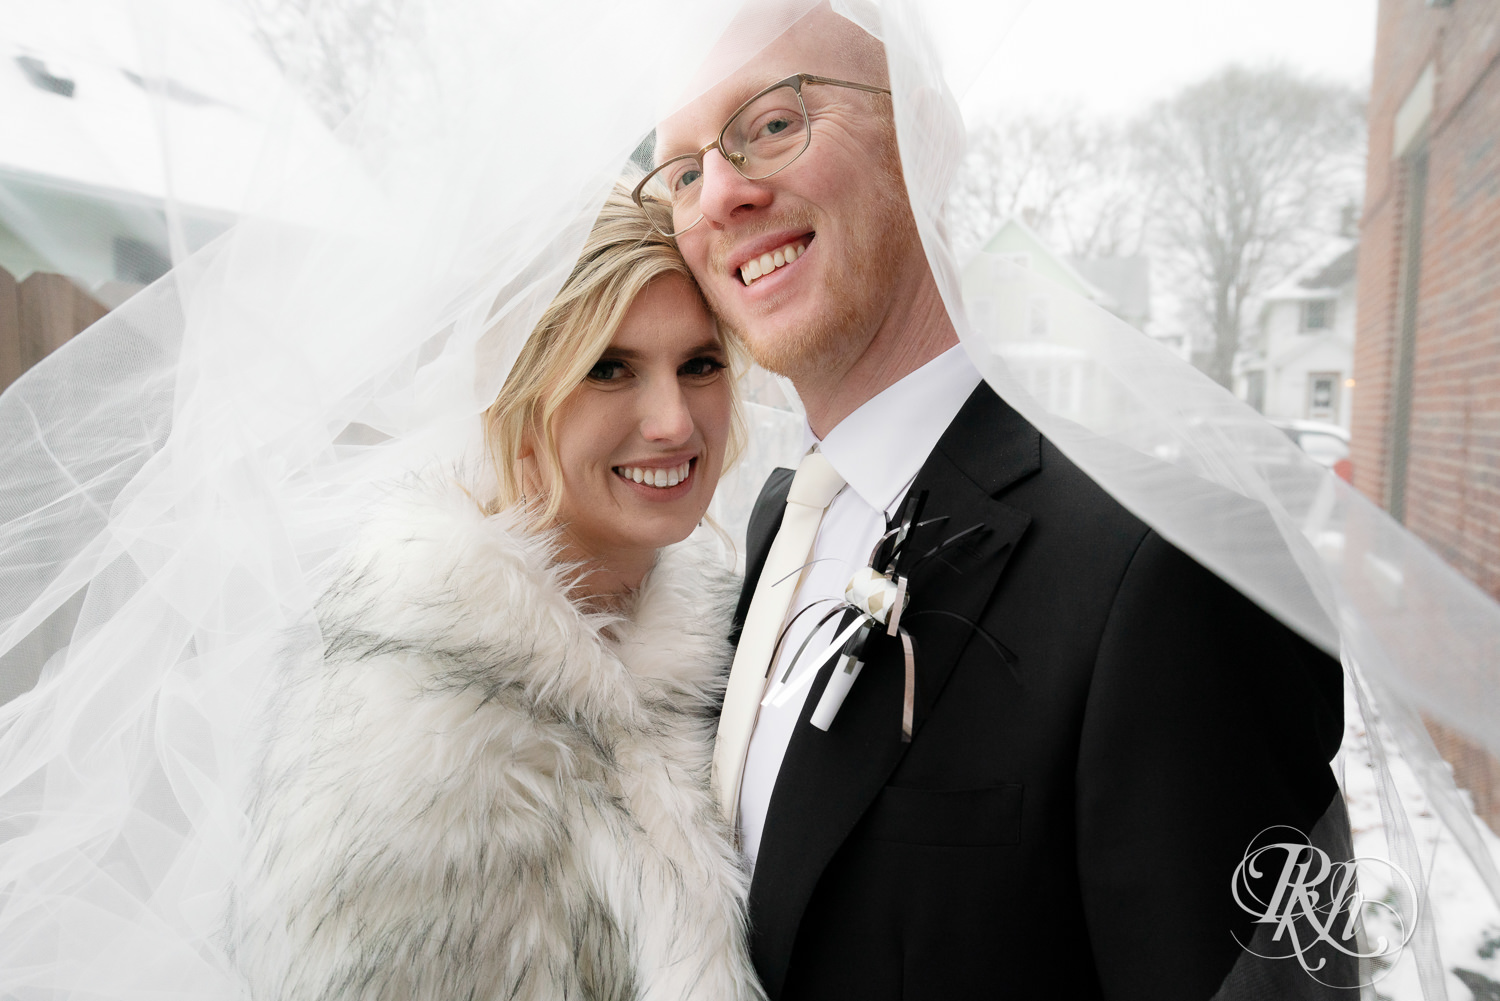 Bride and groom smile under veil at Gatherings at Station 10 in Saint Paul, Minnesota on winter wedding day.